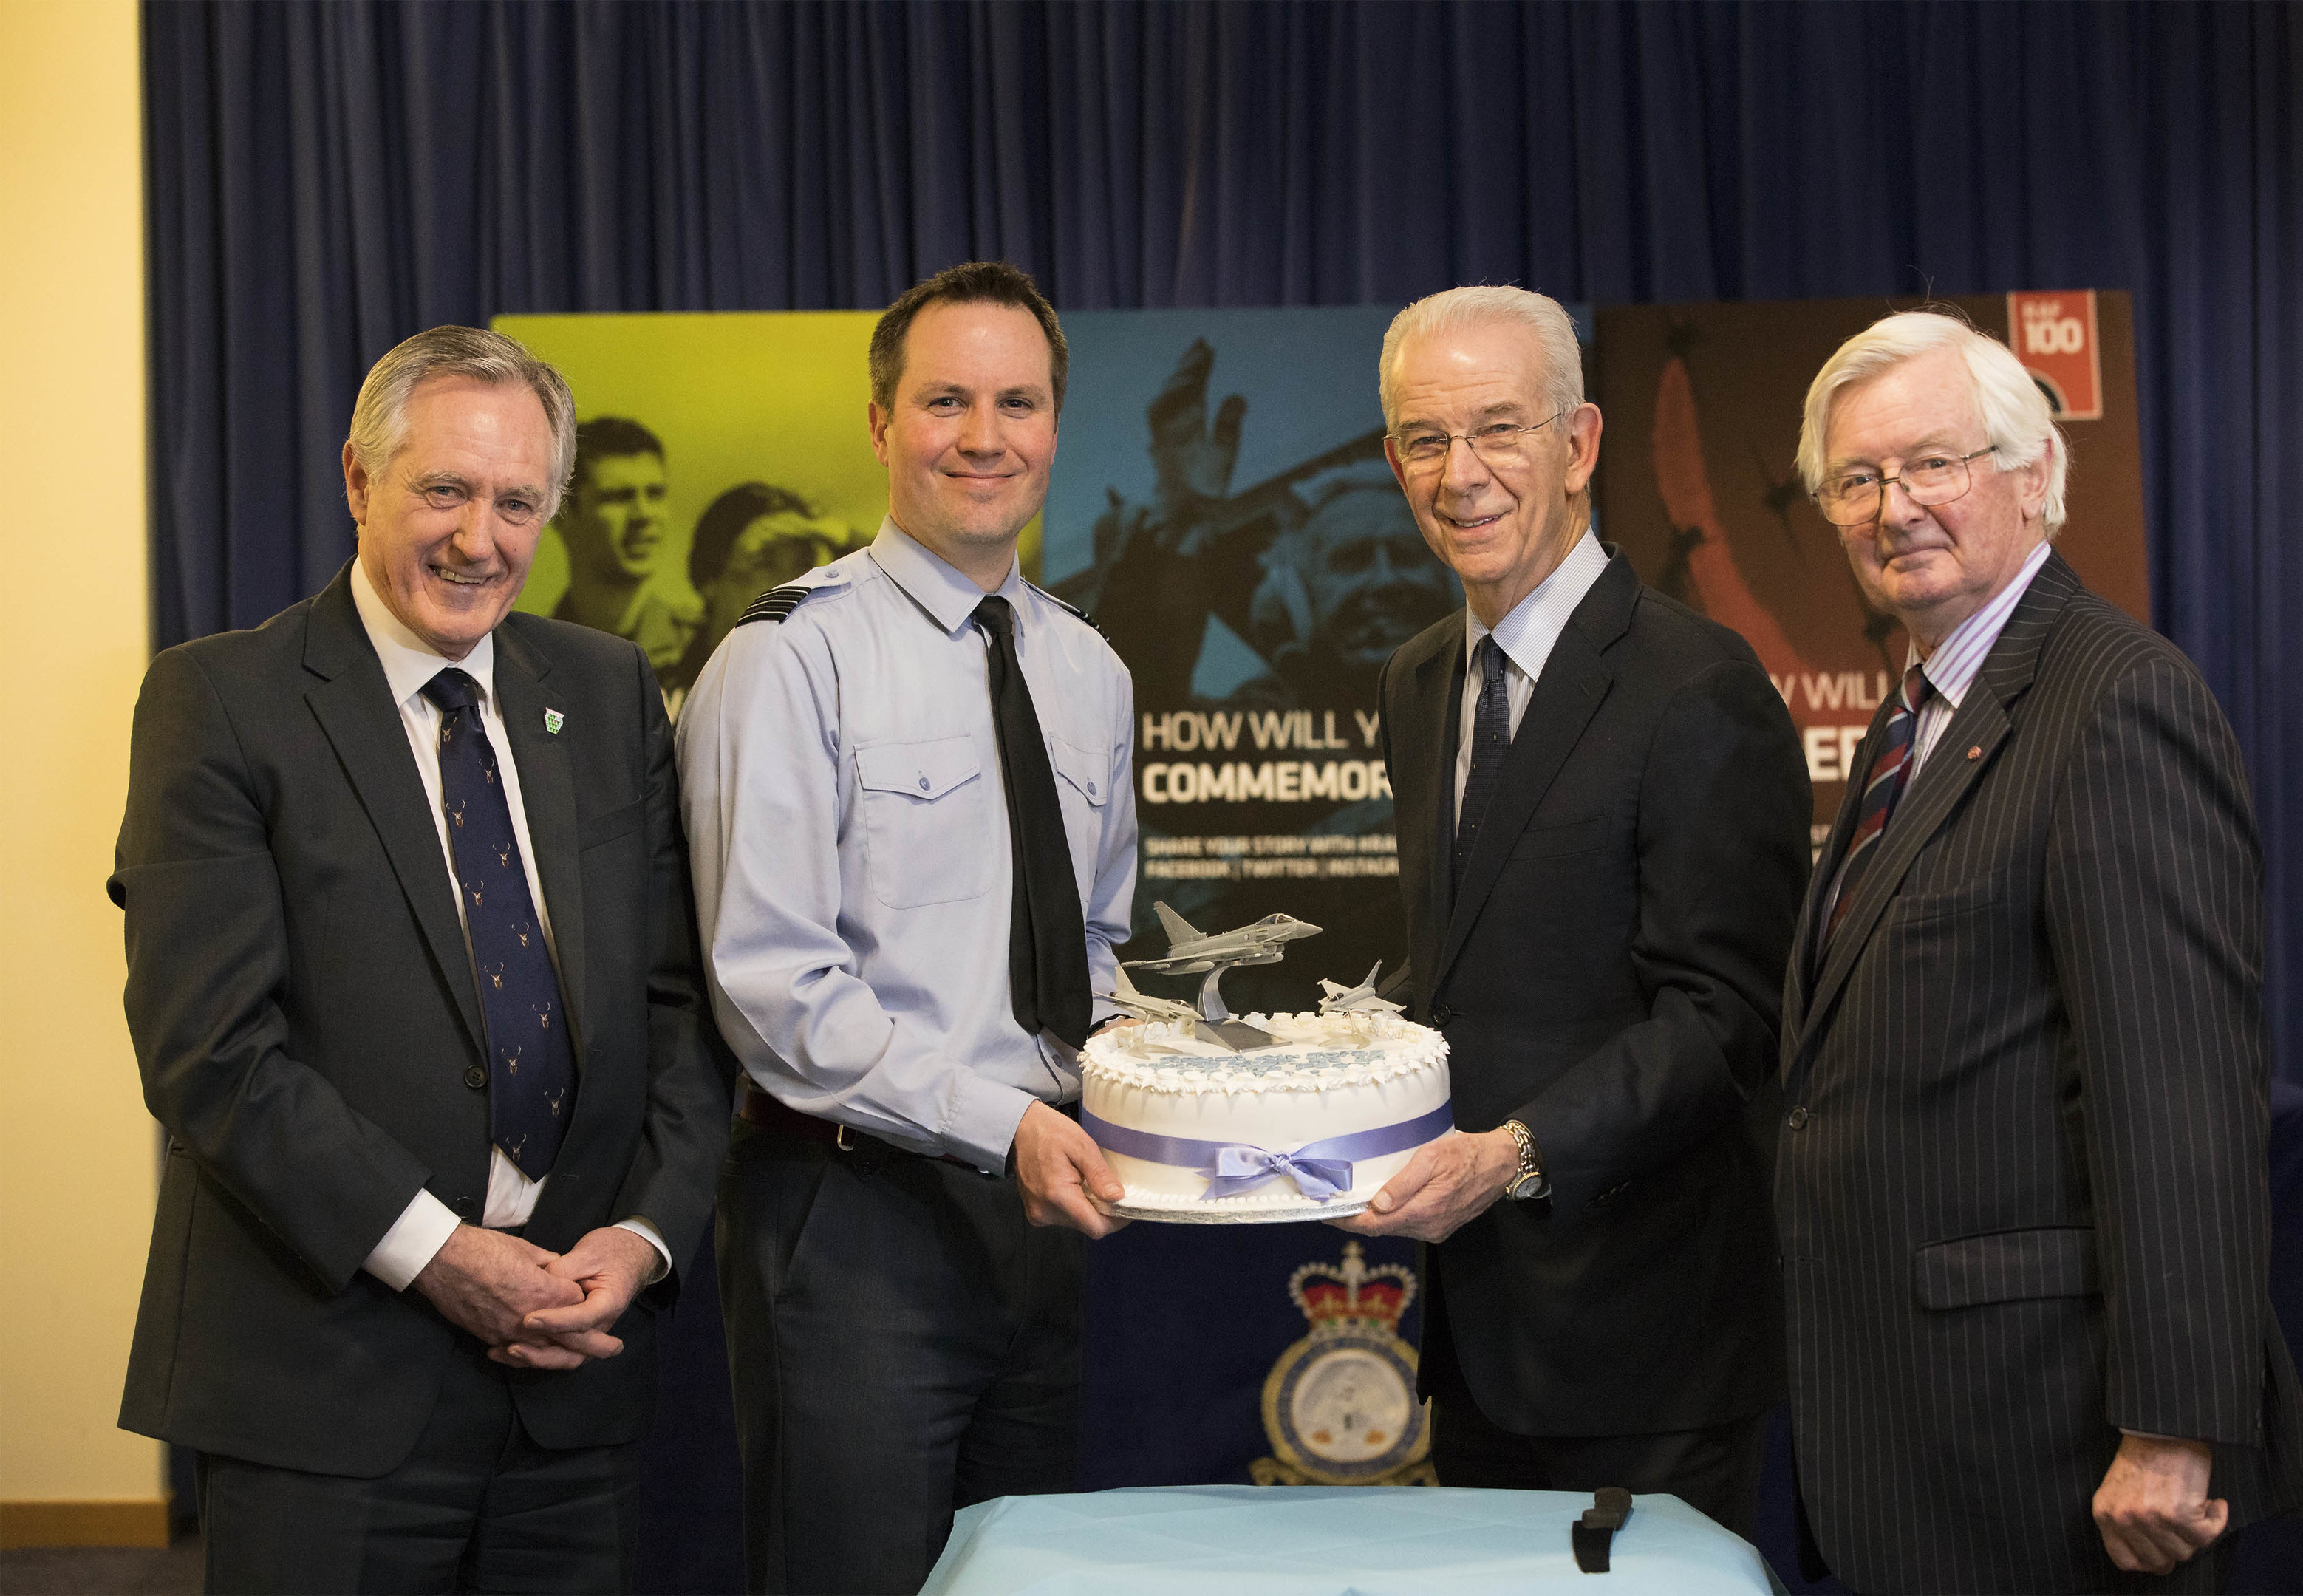 John Cowe, chairman of  Moray Economic Partnership, Wing Commander Matt Hoare, acting Station Commander of RAF Lossiemouth, Jim Walker, joint managing director of Walkers shortbread, and Lt Col Grenville Johnston, Lord Lieutenant of Moray, share cake at the ceremony.